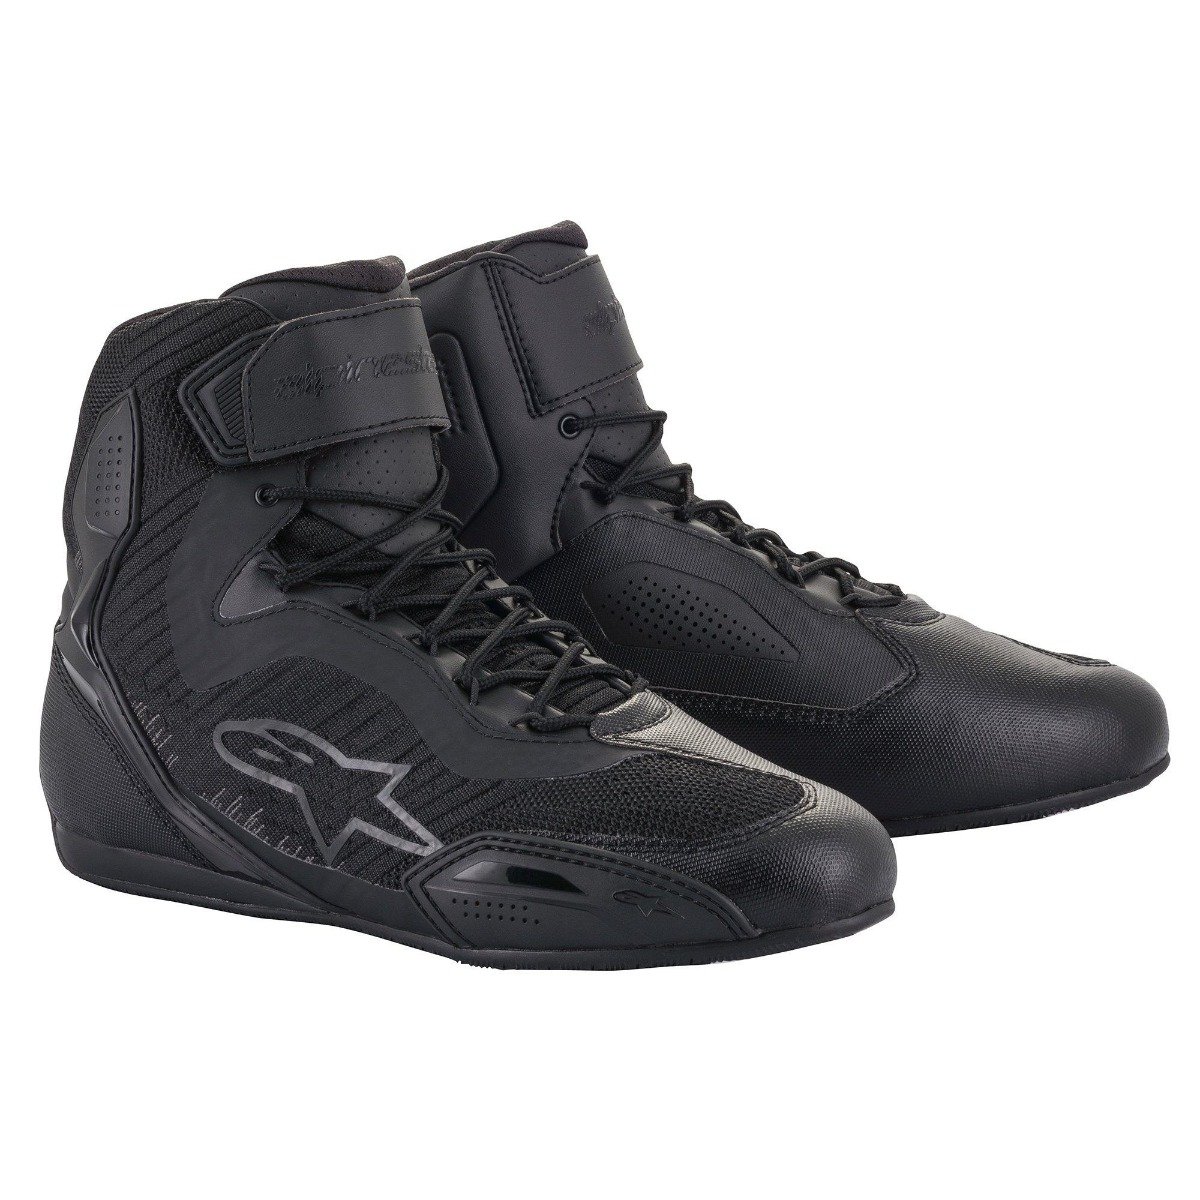 Image of Alpinestars Stella Faster-3 Rideknit Noir Anthracite Chaussures Taille US 6